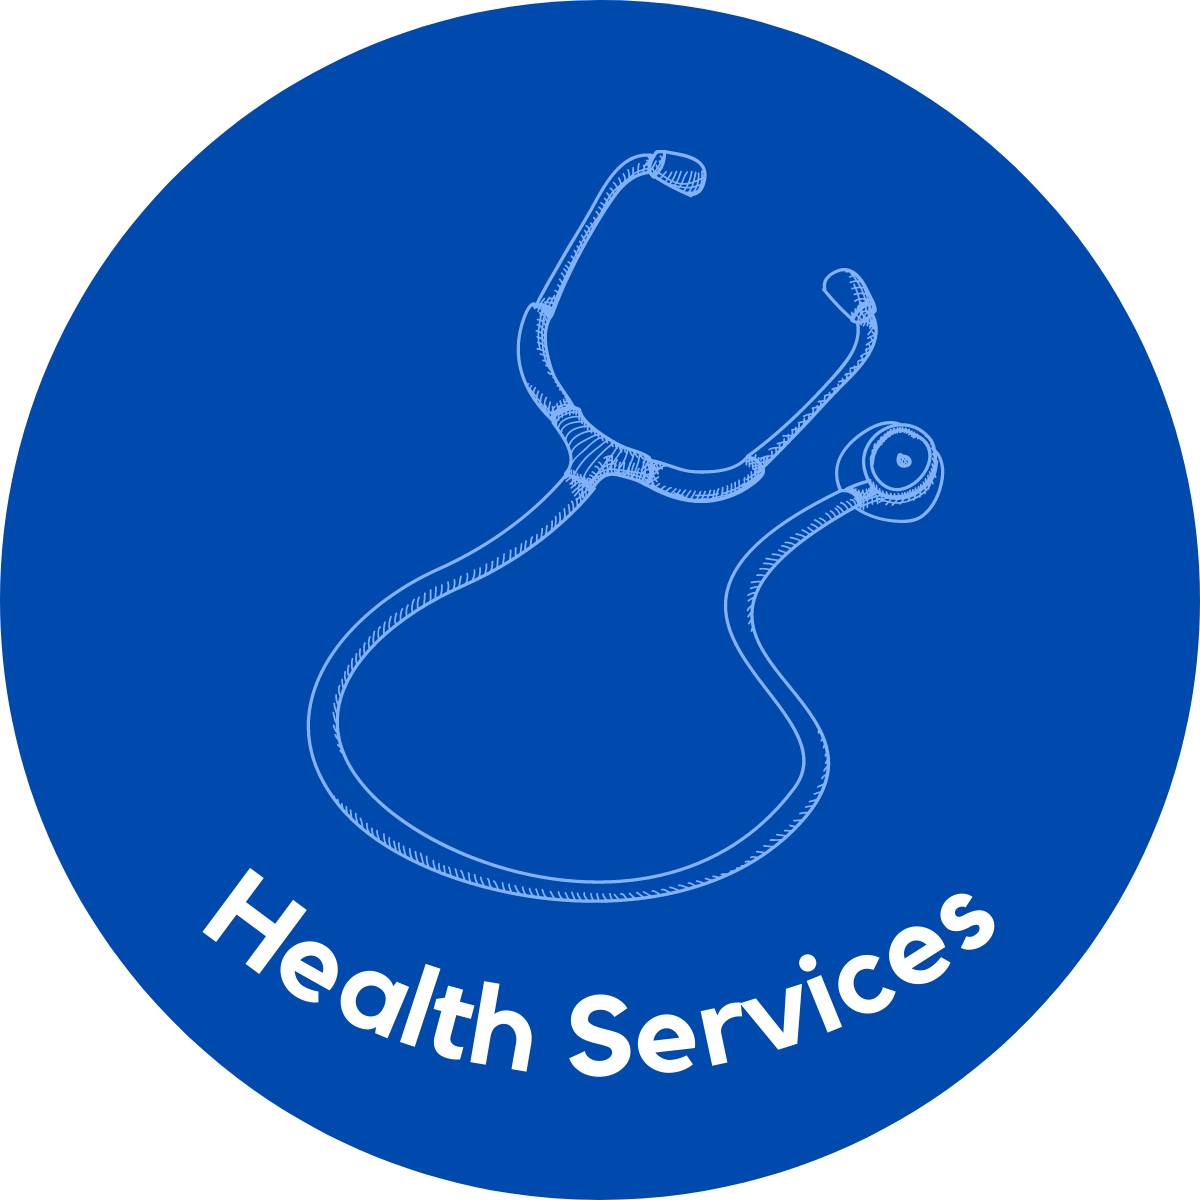 Health services